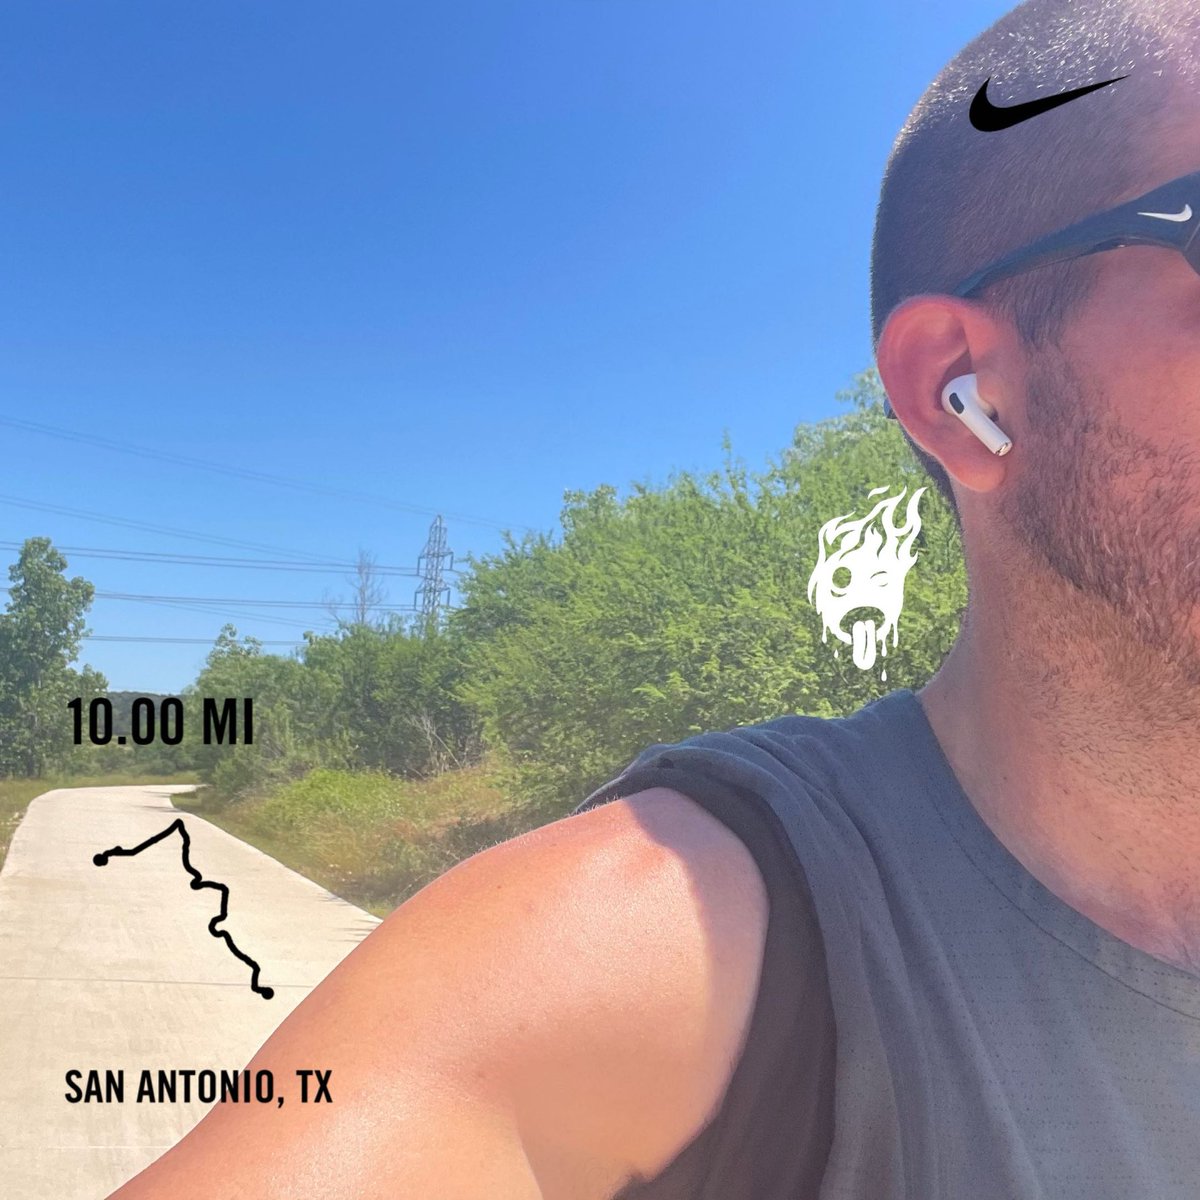 241.0/1000mi

One of the hardest runs in San Antonio by far. 

10+ miles of switchback turns that are 95% uphill. Just brutal on the legs. 

I’m f*cking exhausted. 🥵🥵🥵